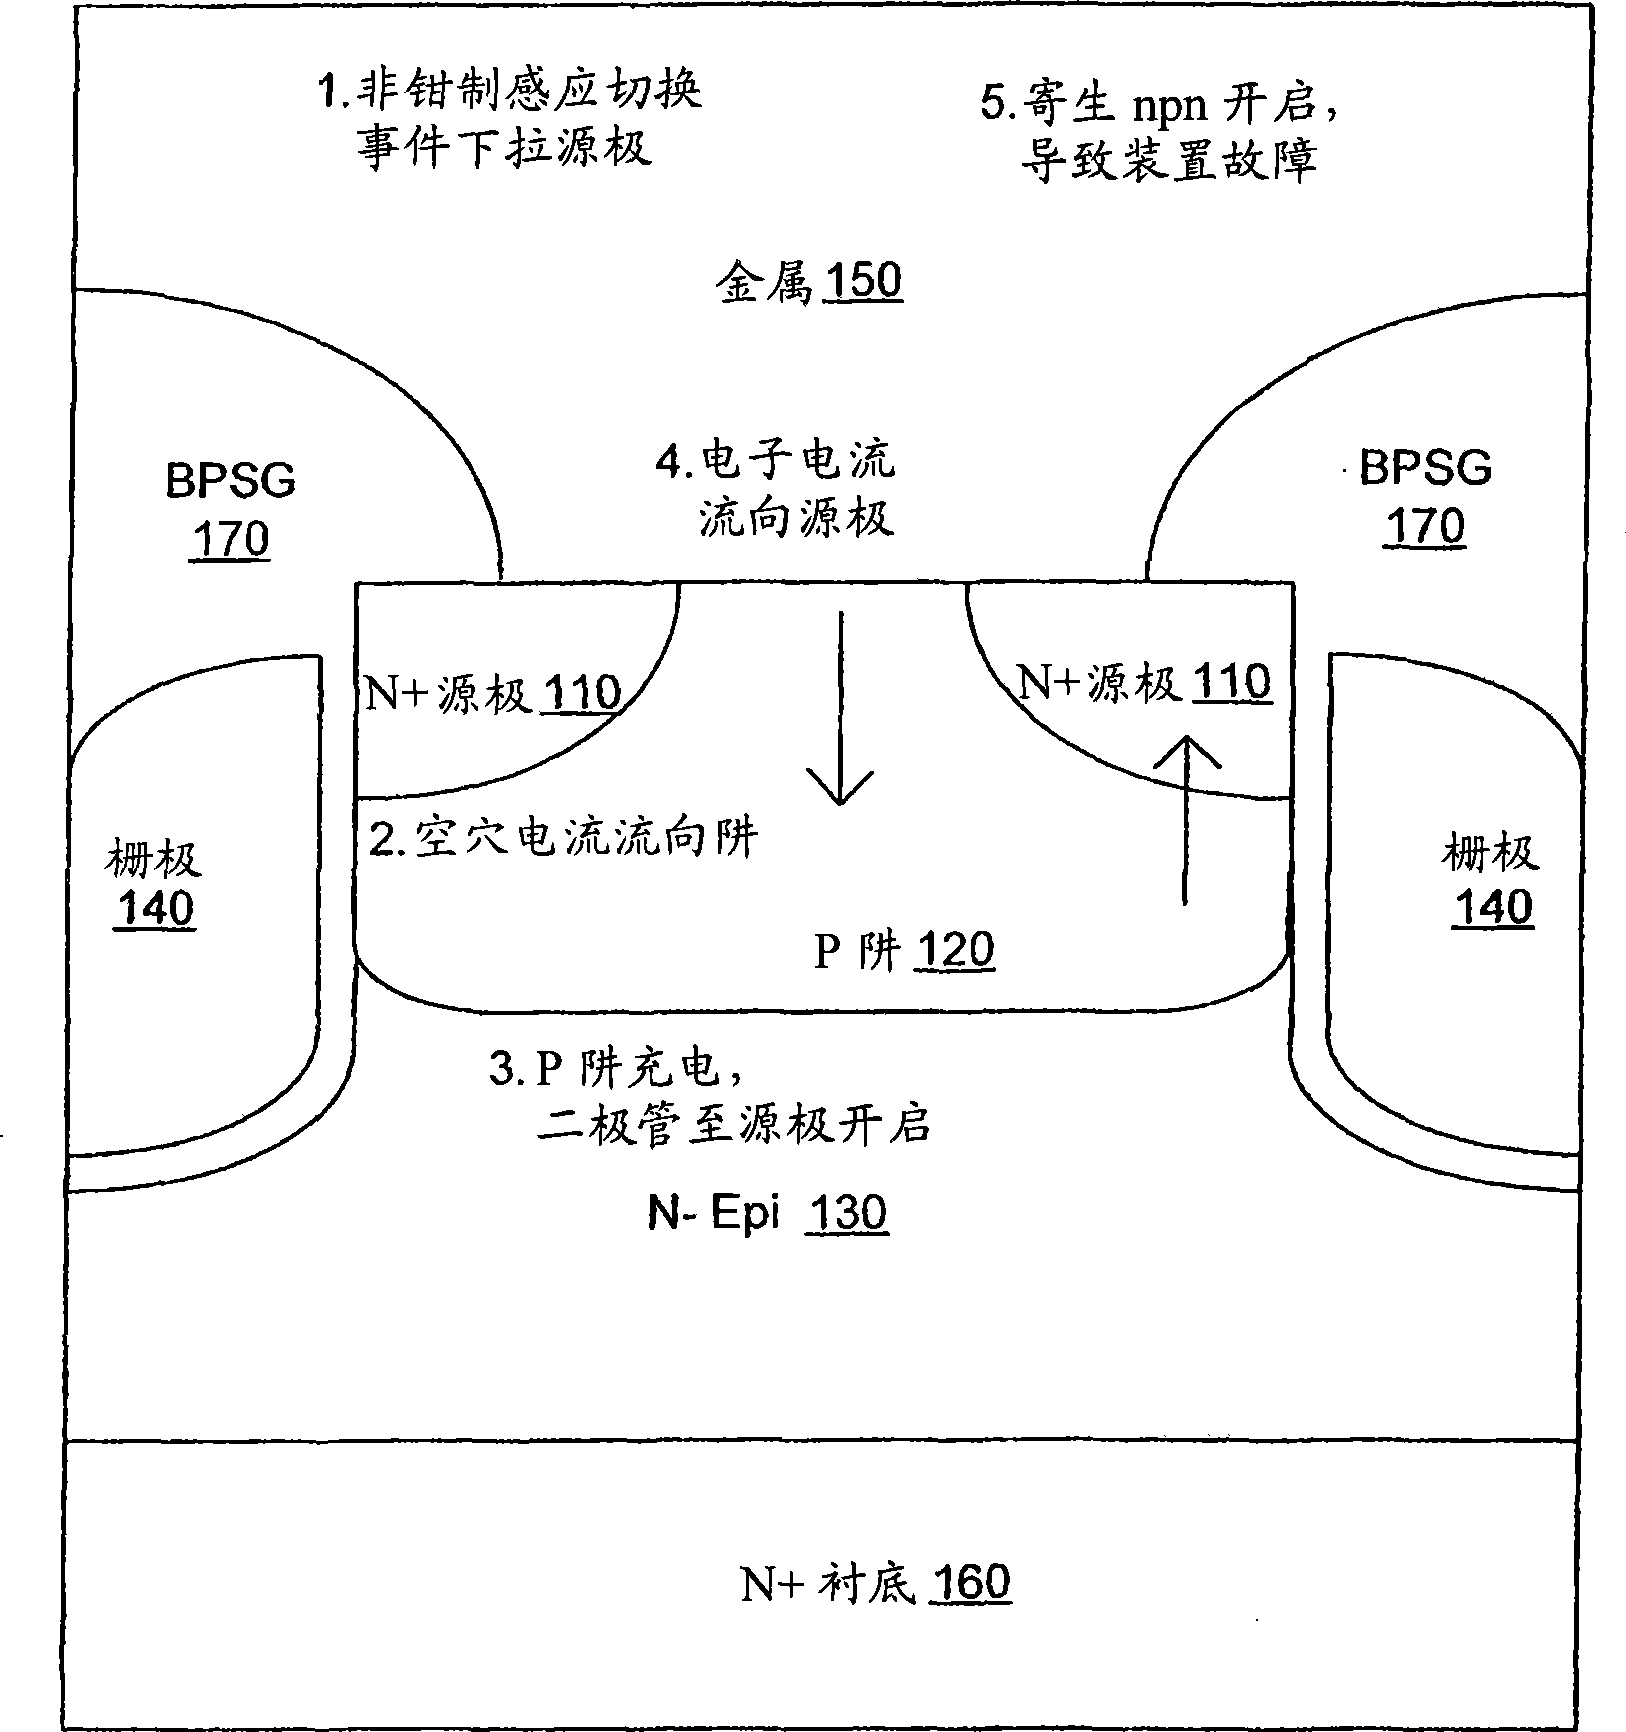 Power trench MOSFET having SiGe/Si channel structure